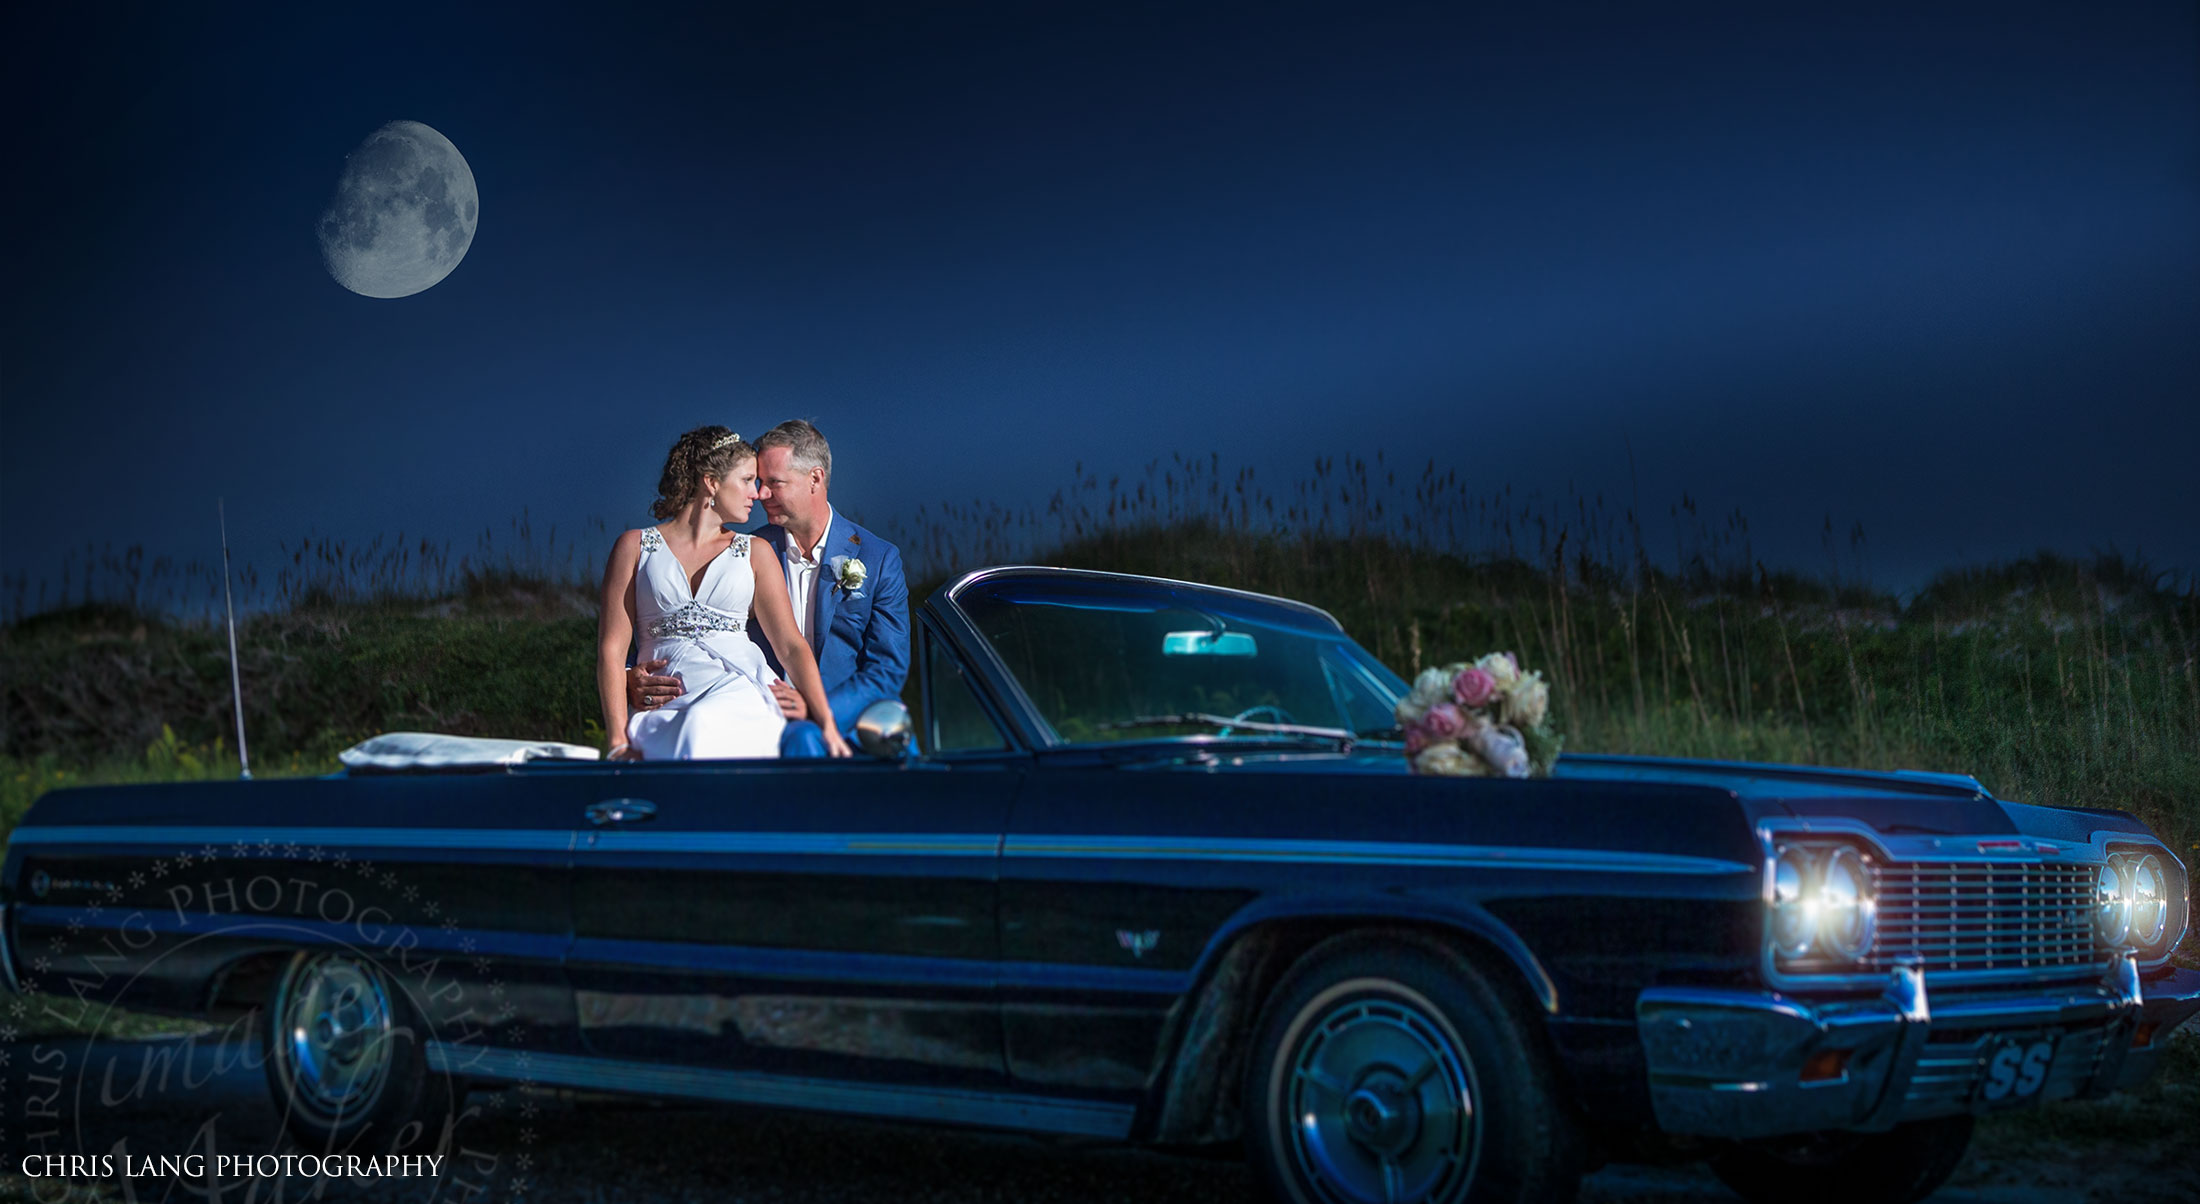 Bride & groom ina convertable car  at he beach watchingthe mooncome up over the Atlantic Ocean - Wilmington NC Photographers -